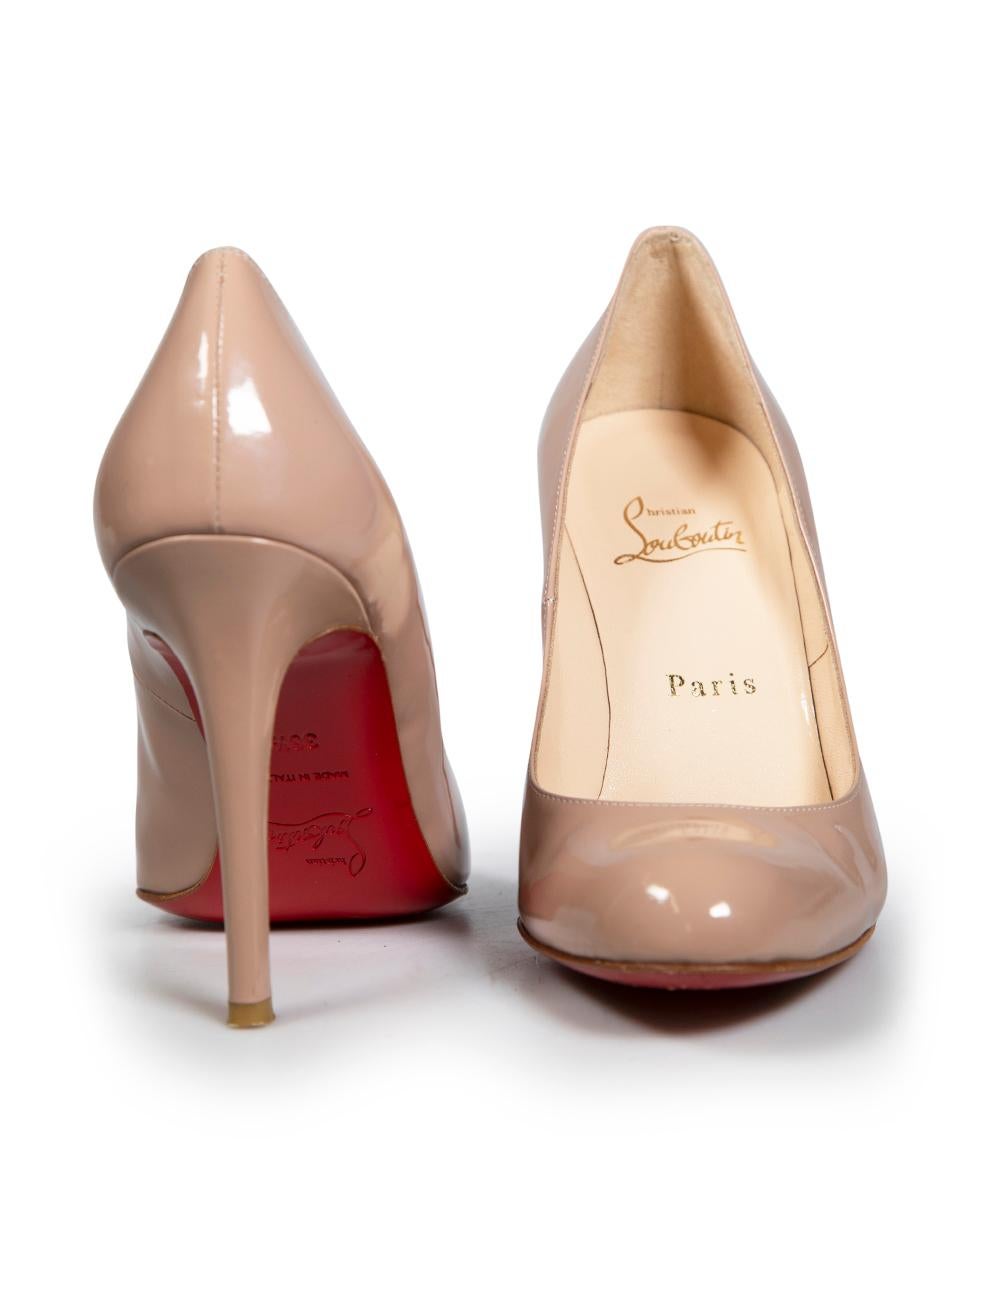 Christian Louboutin Nude Patent Fifi Pumps Size IT 36.5 In Good Condition For Sale In London, GB